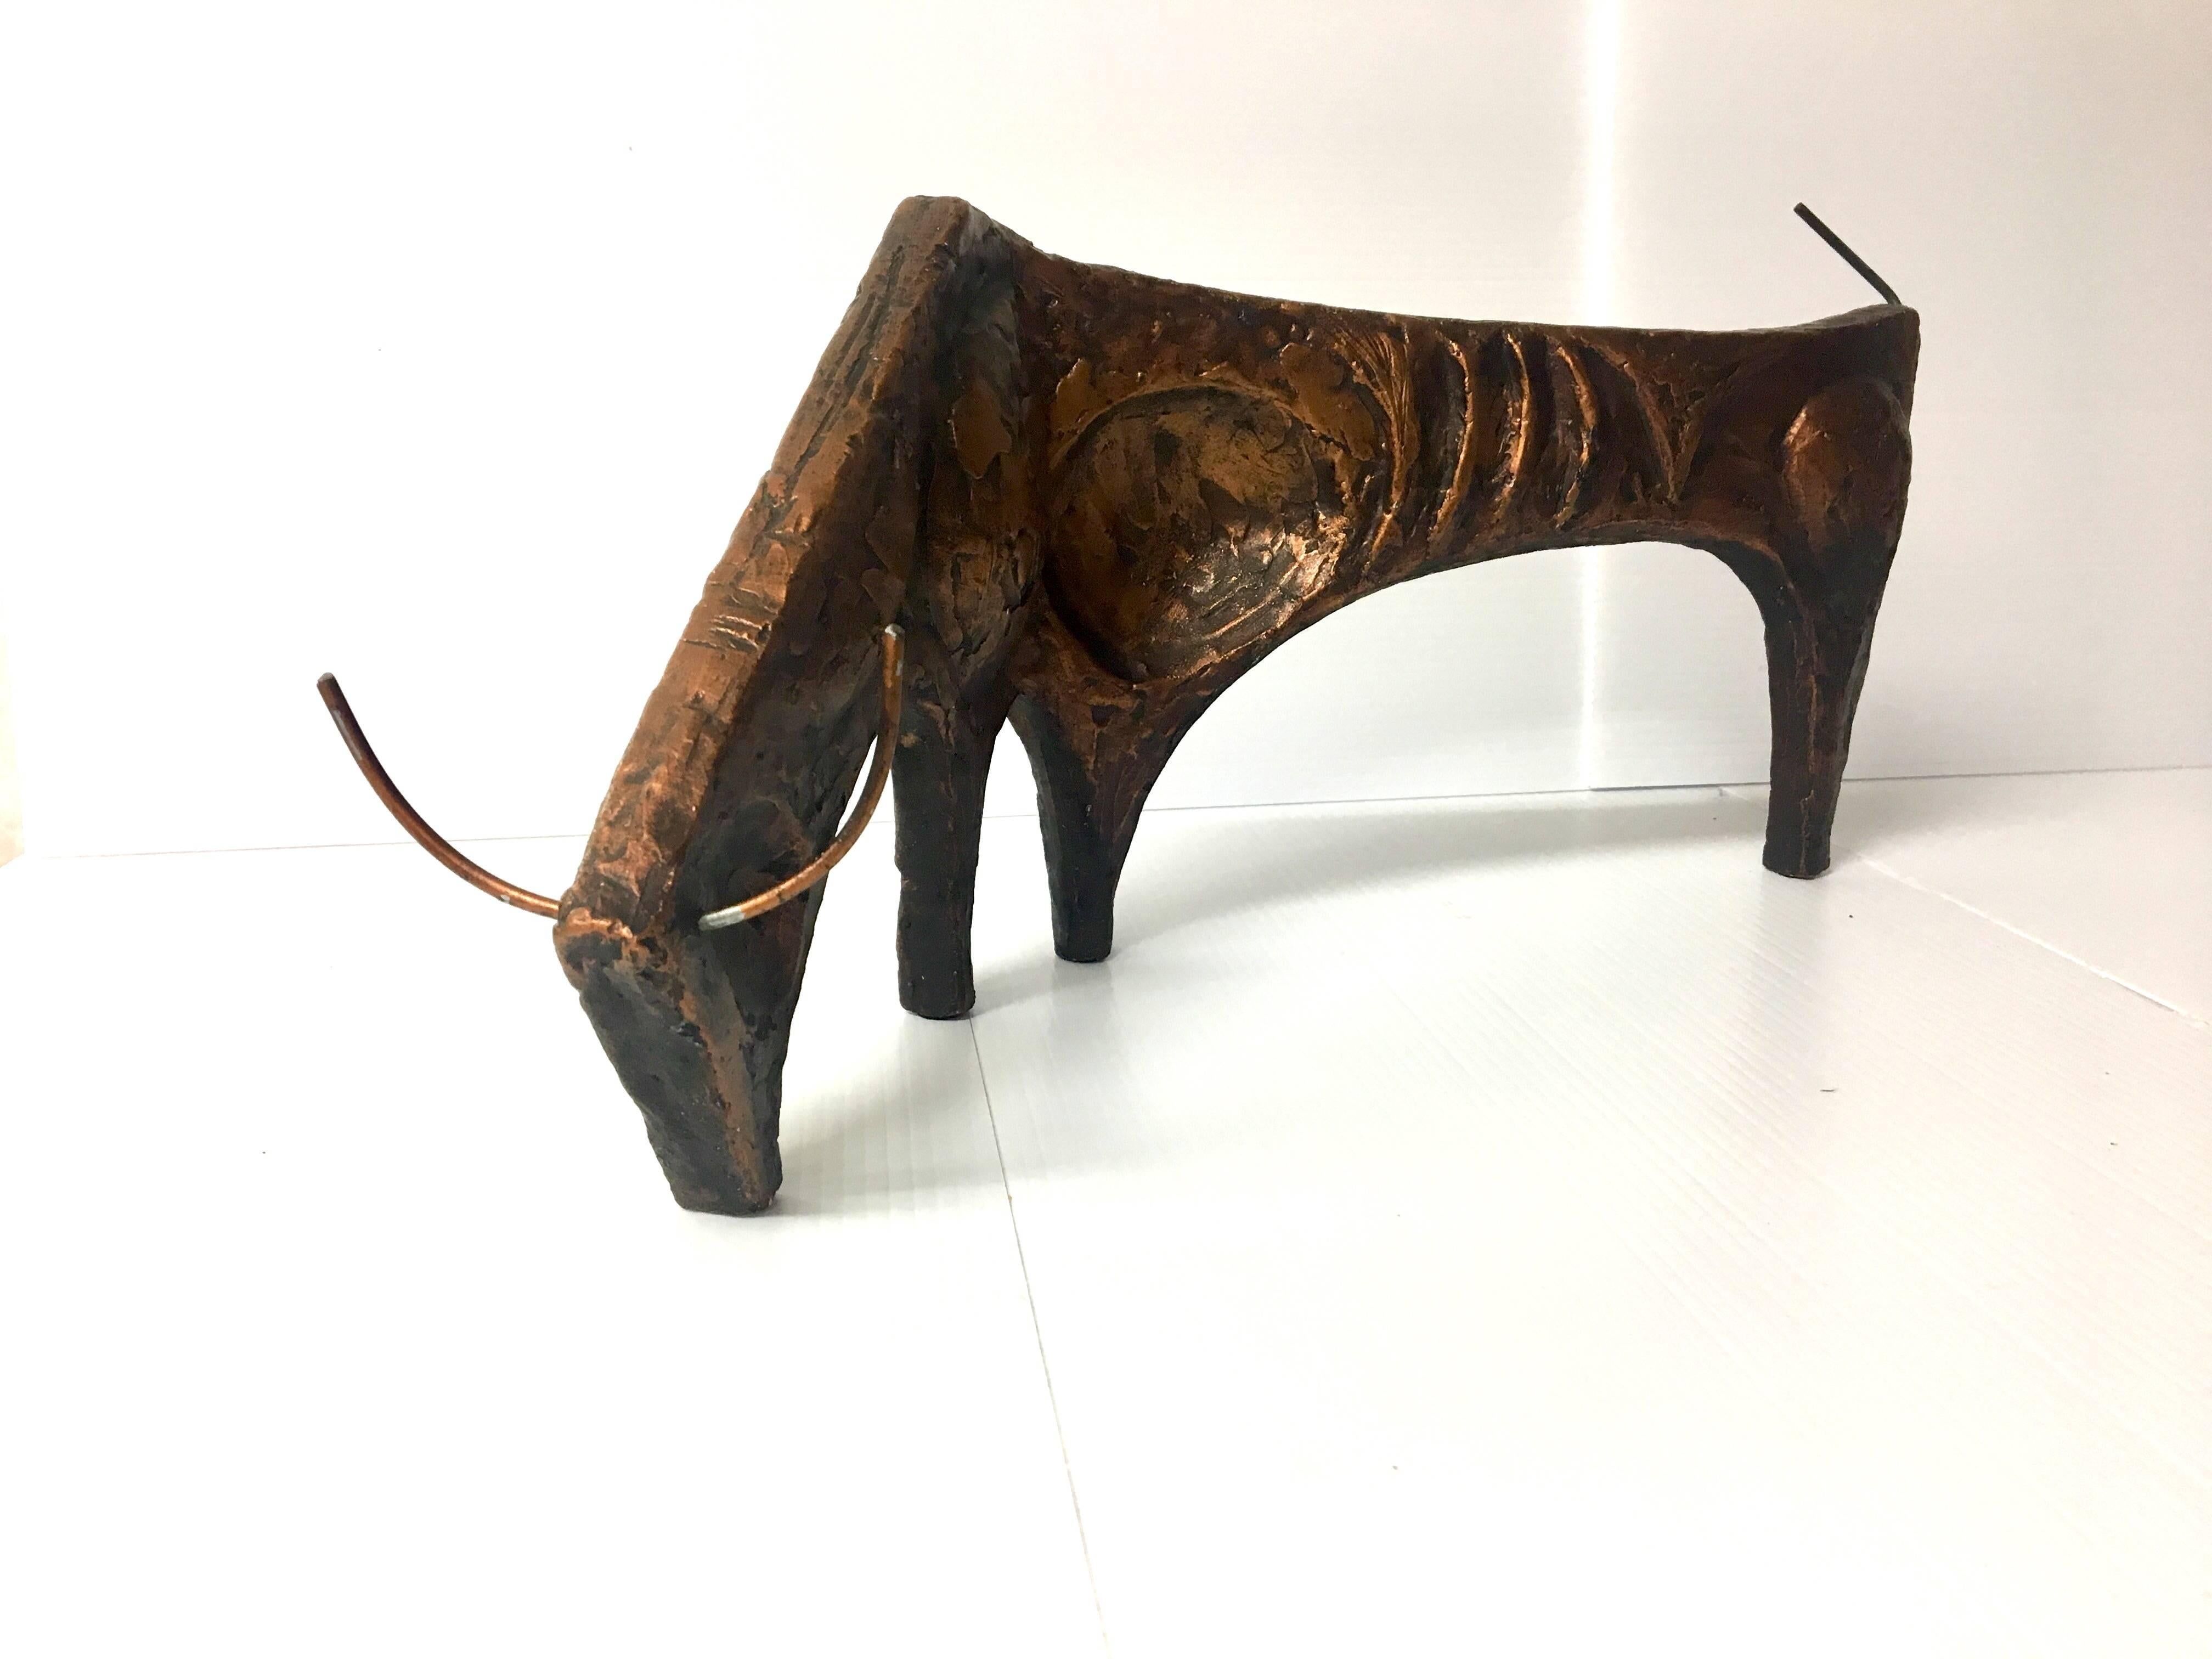 Unique and rare Brutalist bull sculpture, Picasso style, signed By Willem Degroot and produced by Austin Products, circa 1967. It is a very impressive and beautiful piece made of plaster in a faux copper finish with wire tail and horns.